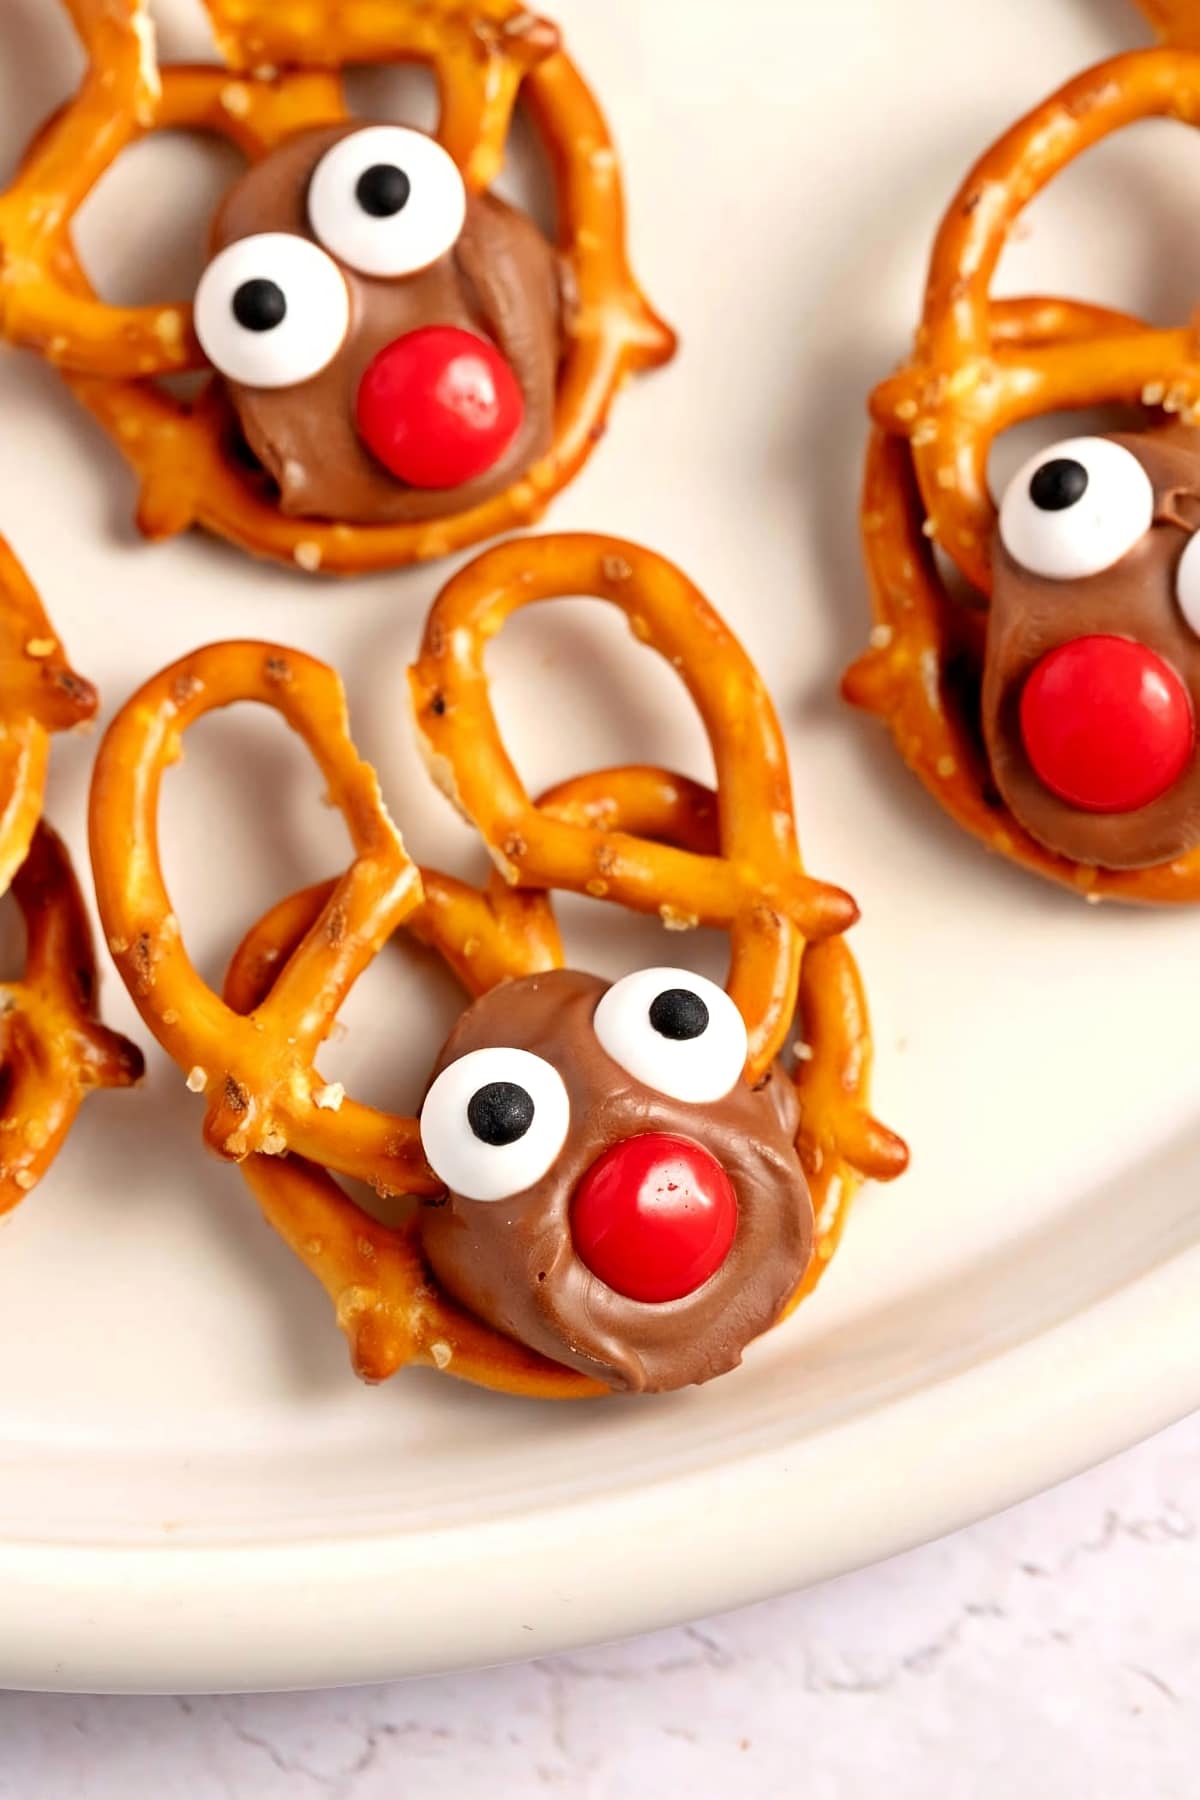 Sweet Homemade Reindeer Pretzels with Eye Candies and Red Candy Noses